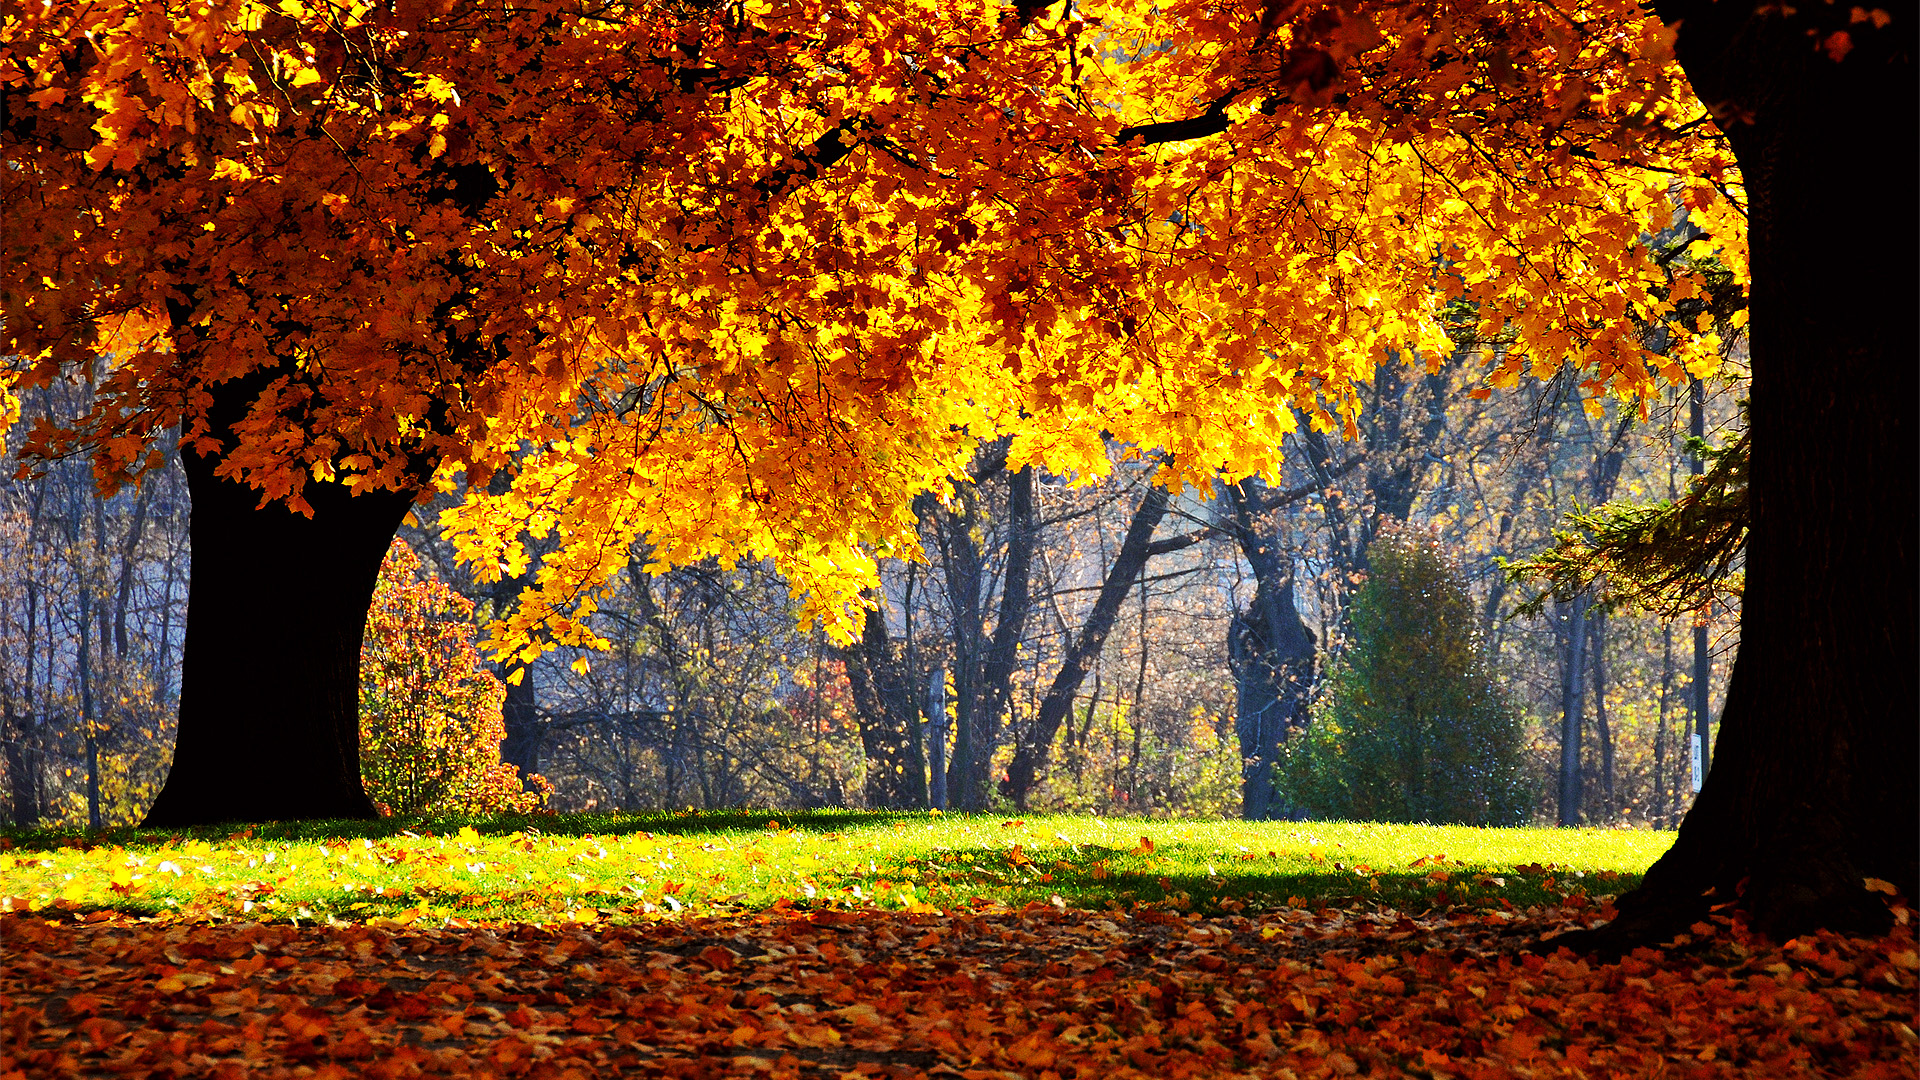 Golden autumn leaves covering a serene woodland path amidst vibrant nature.